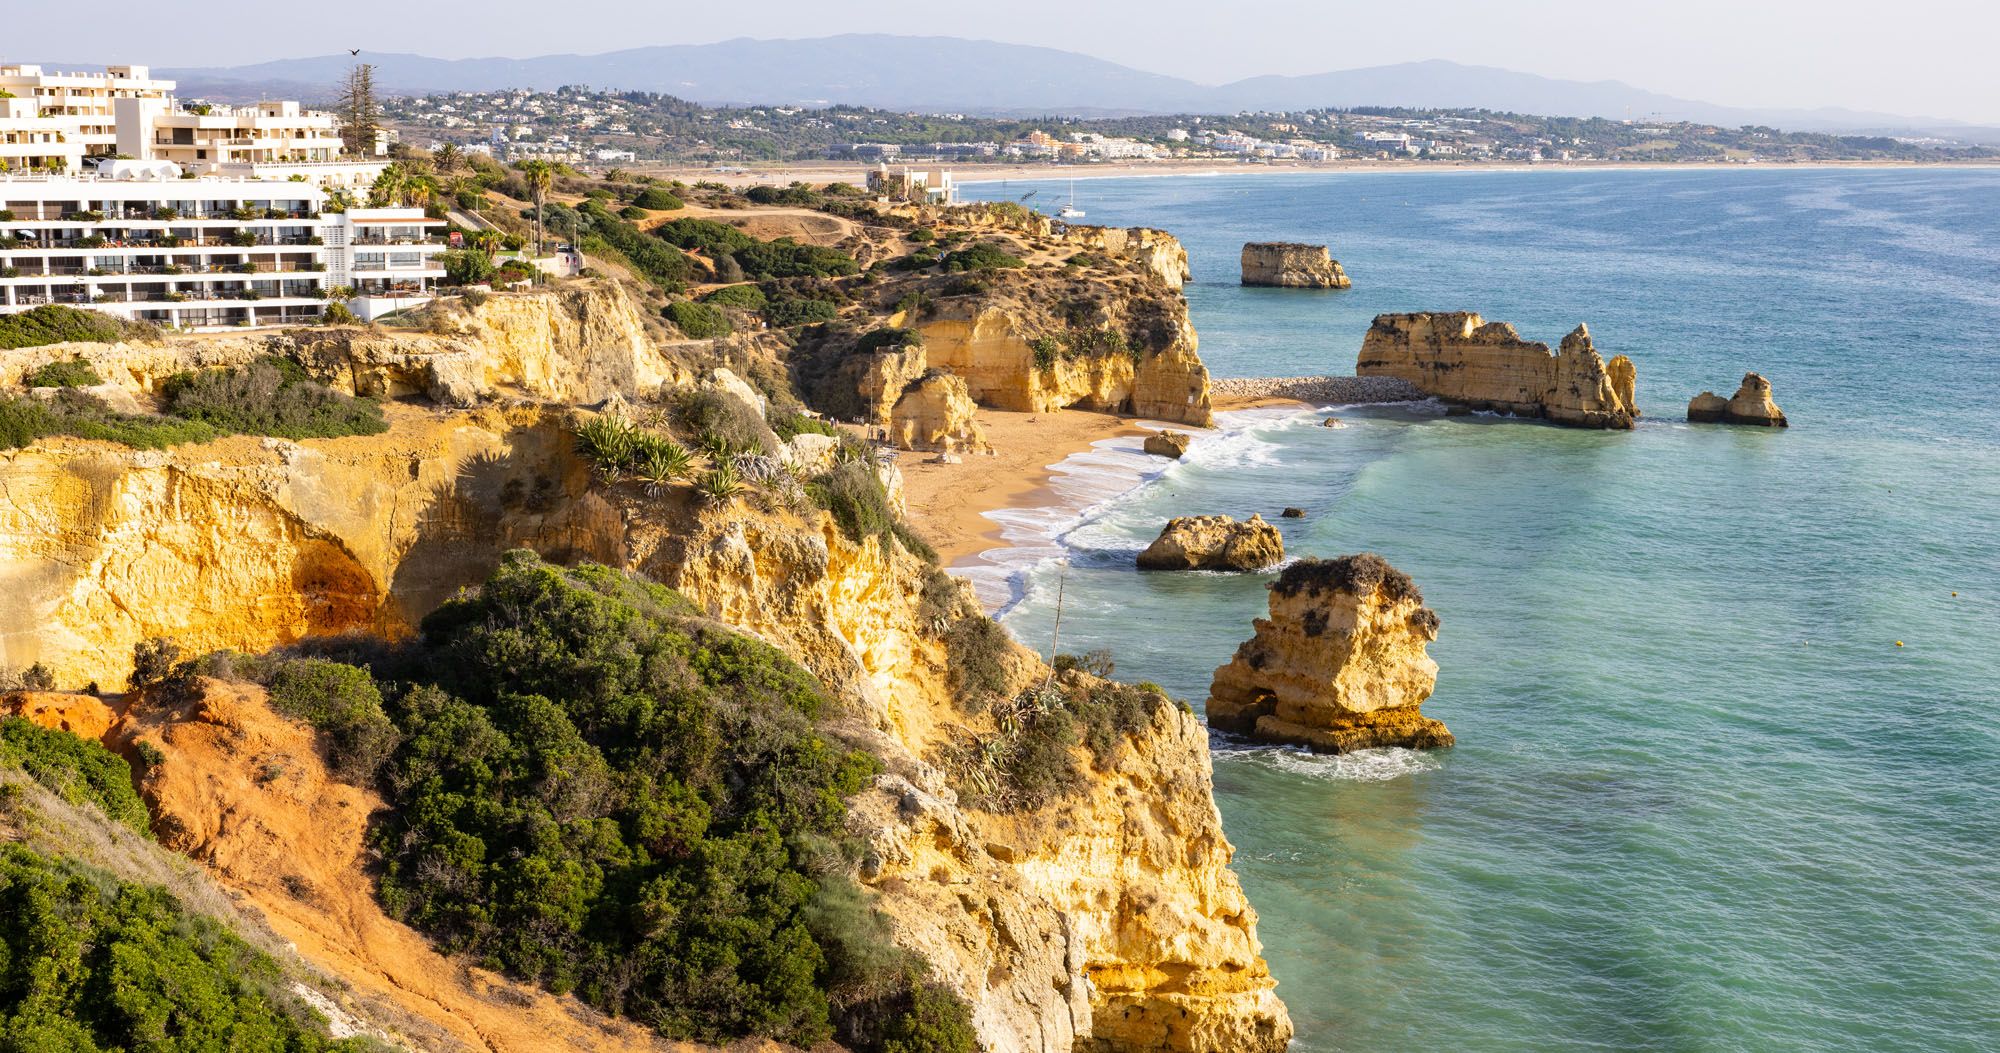 Featured image for “Visiting the Algarve in October: Weather & What to Expect”